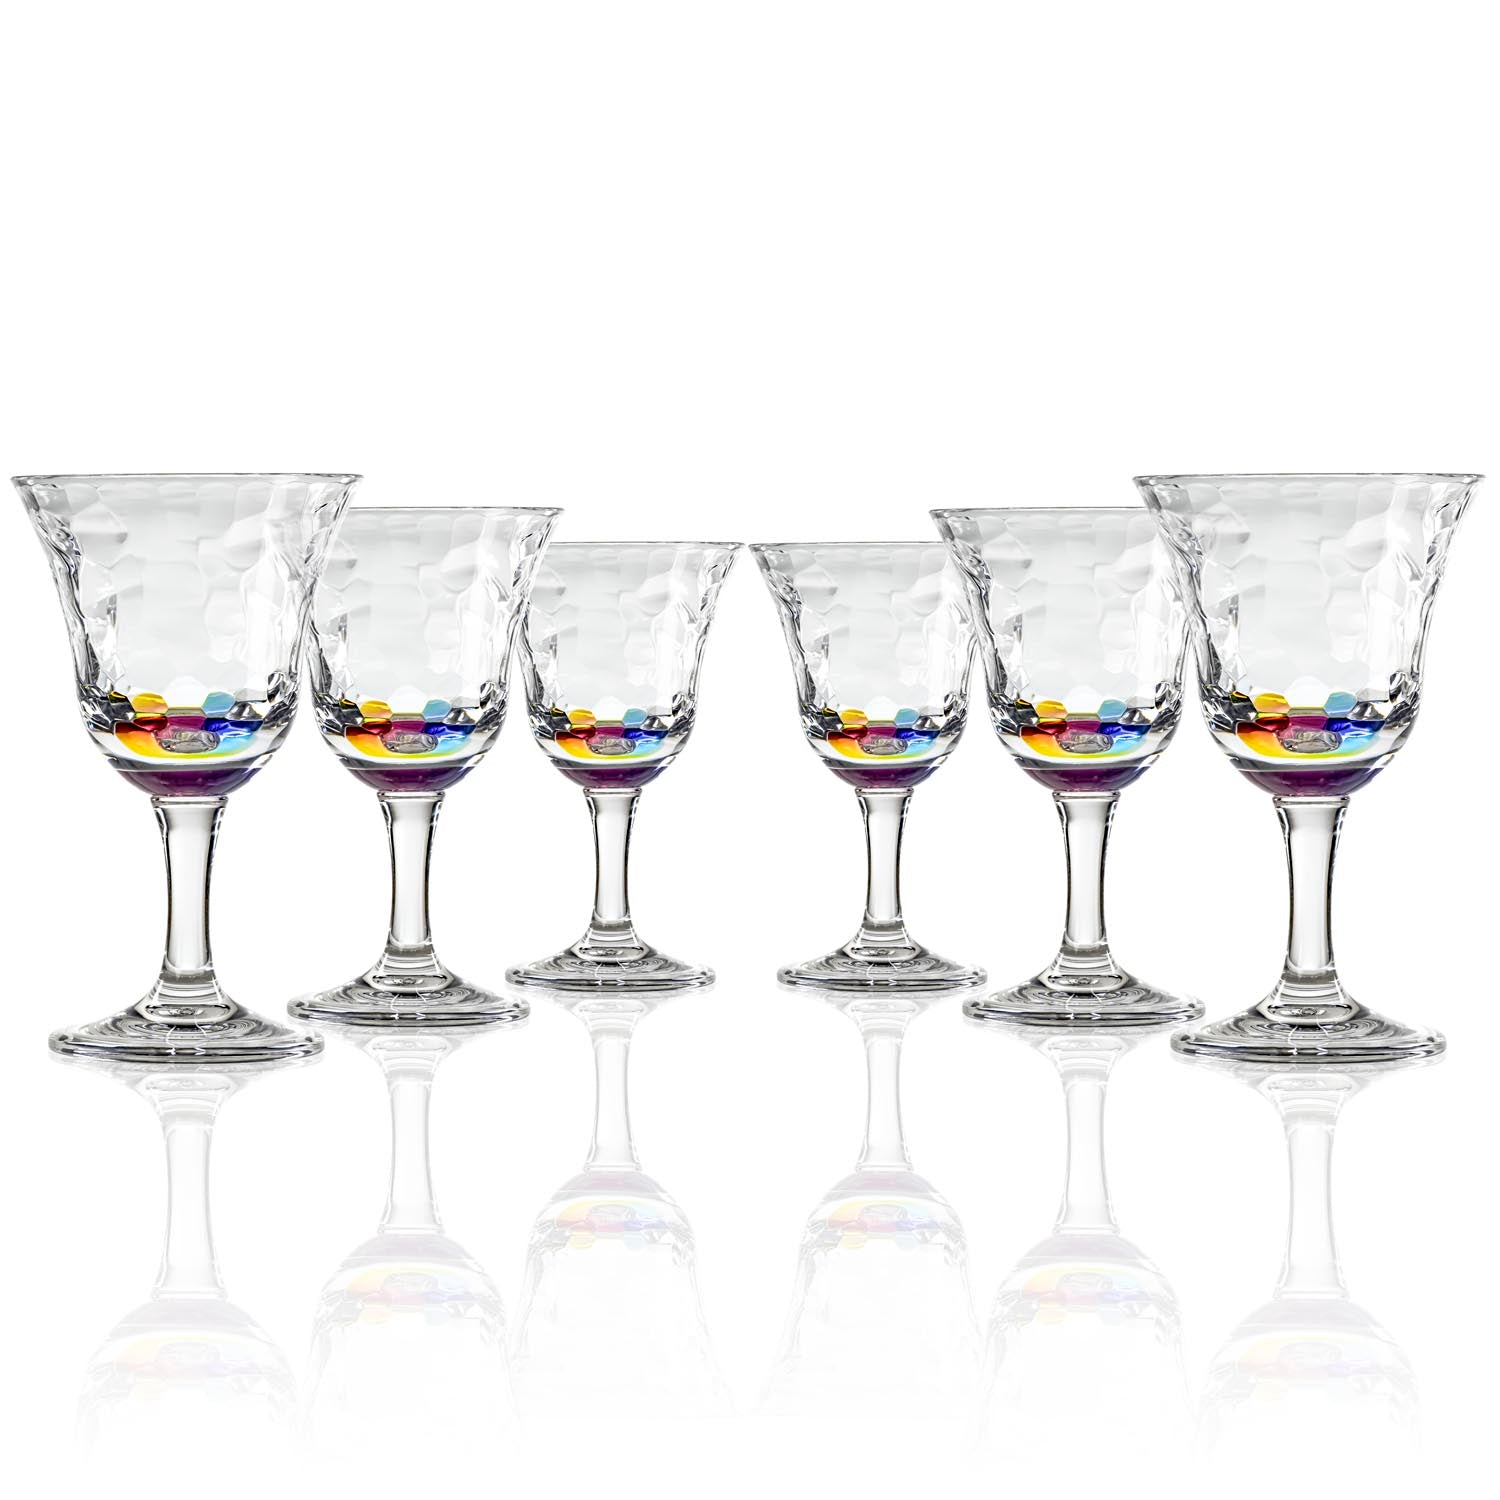 Set of 6, 12-ounce rainbow acrylic wine glasses from the Merritt Designs Cascade collection. Front view on white background